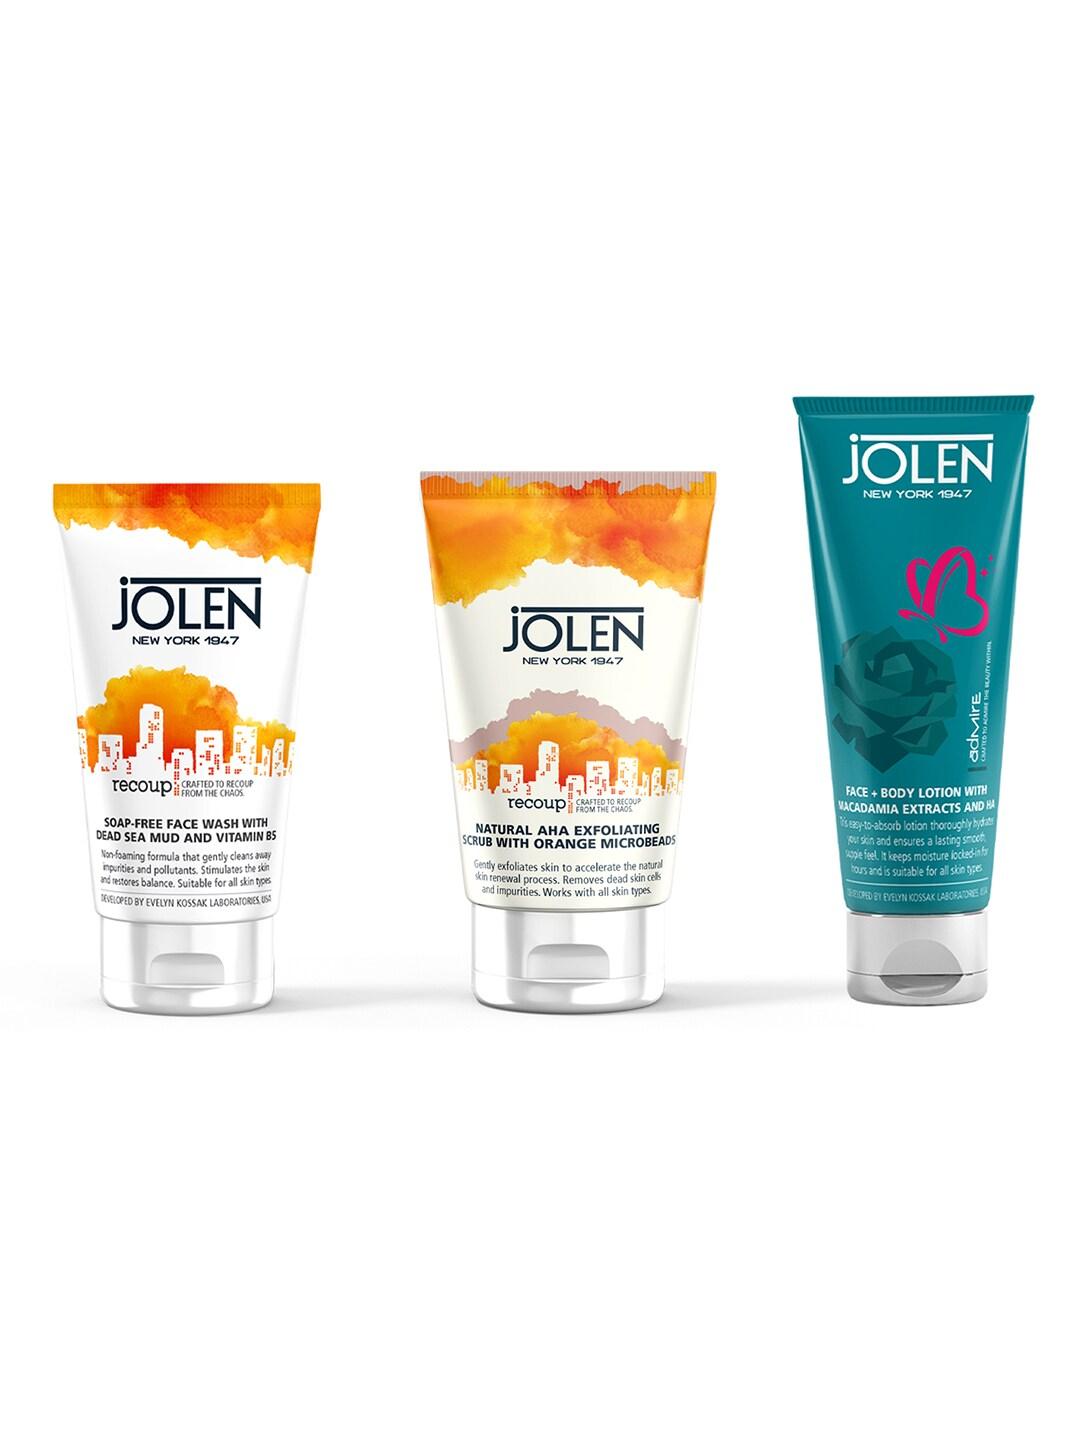 Jolen New York Set of Soap-Free Face Wash & AHA Scrub with Face Body Lotion - 405 ml